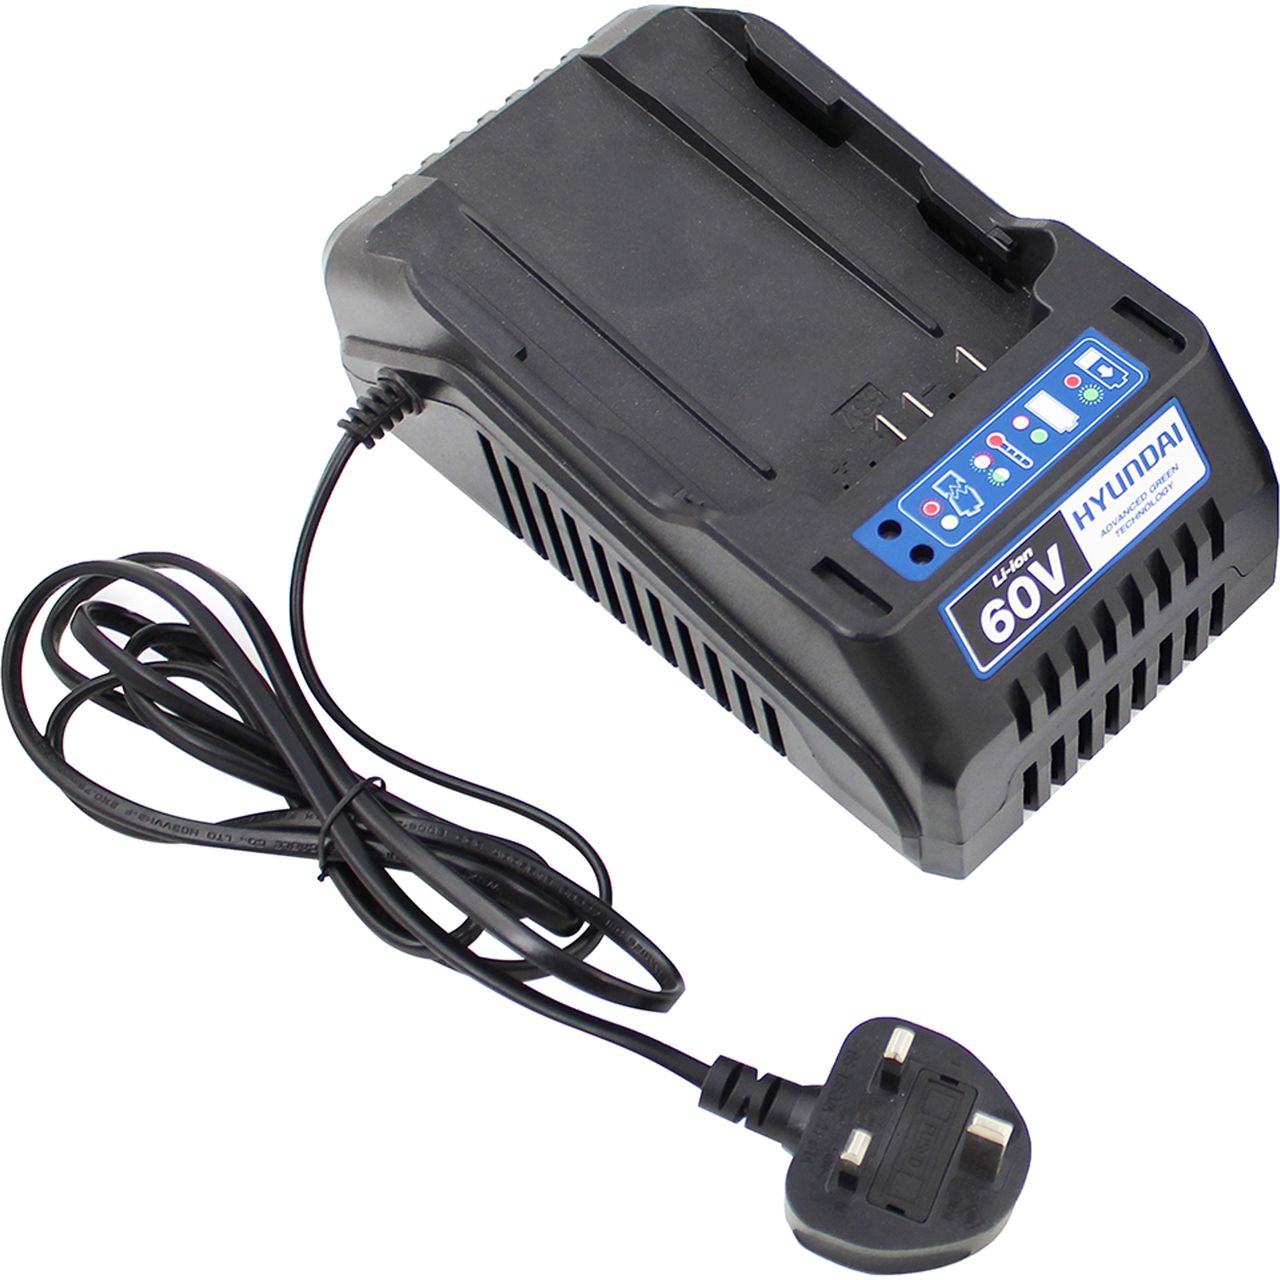 Hyundai HYCH602 Battery Charger Review